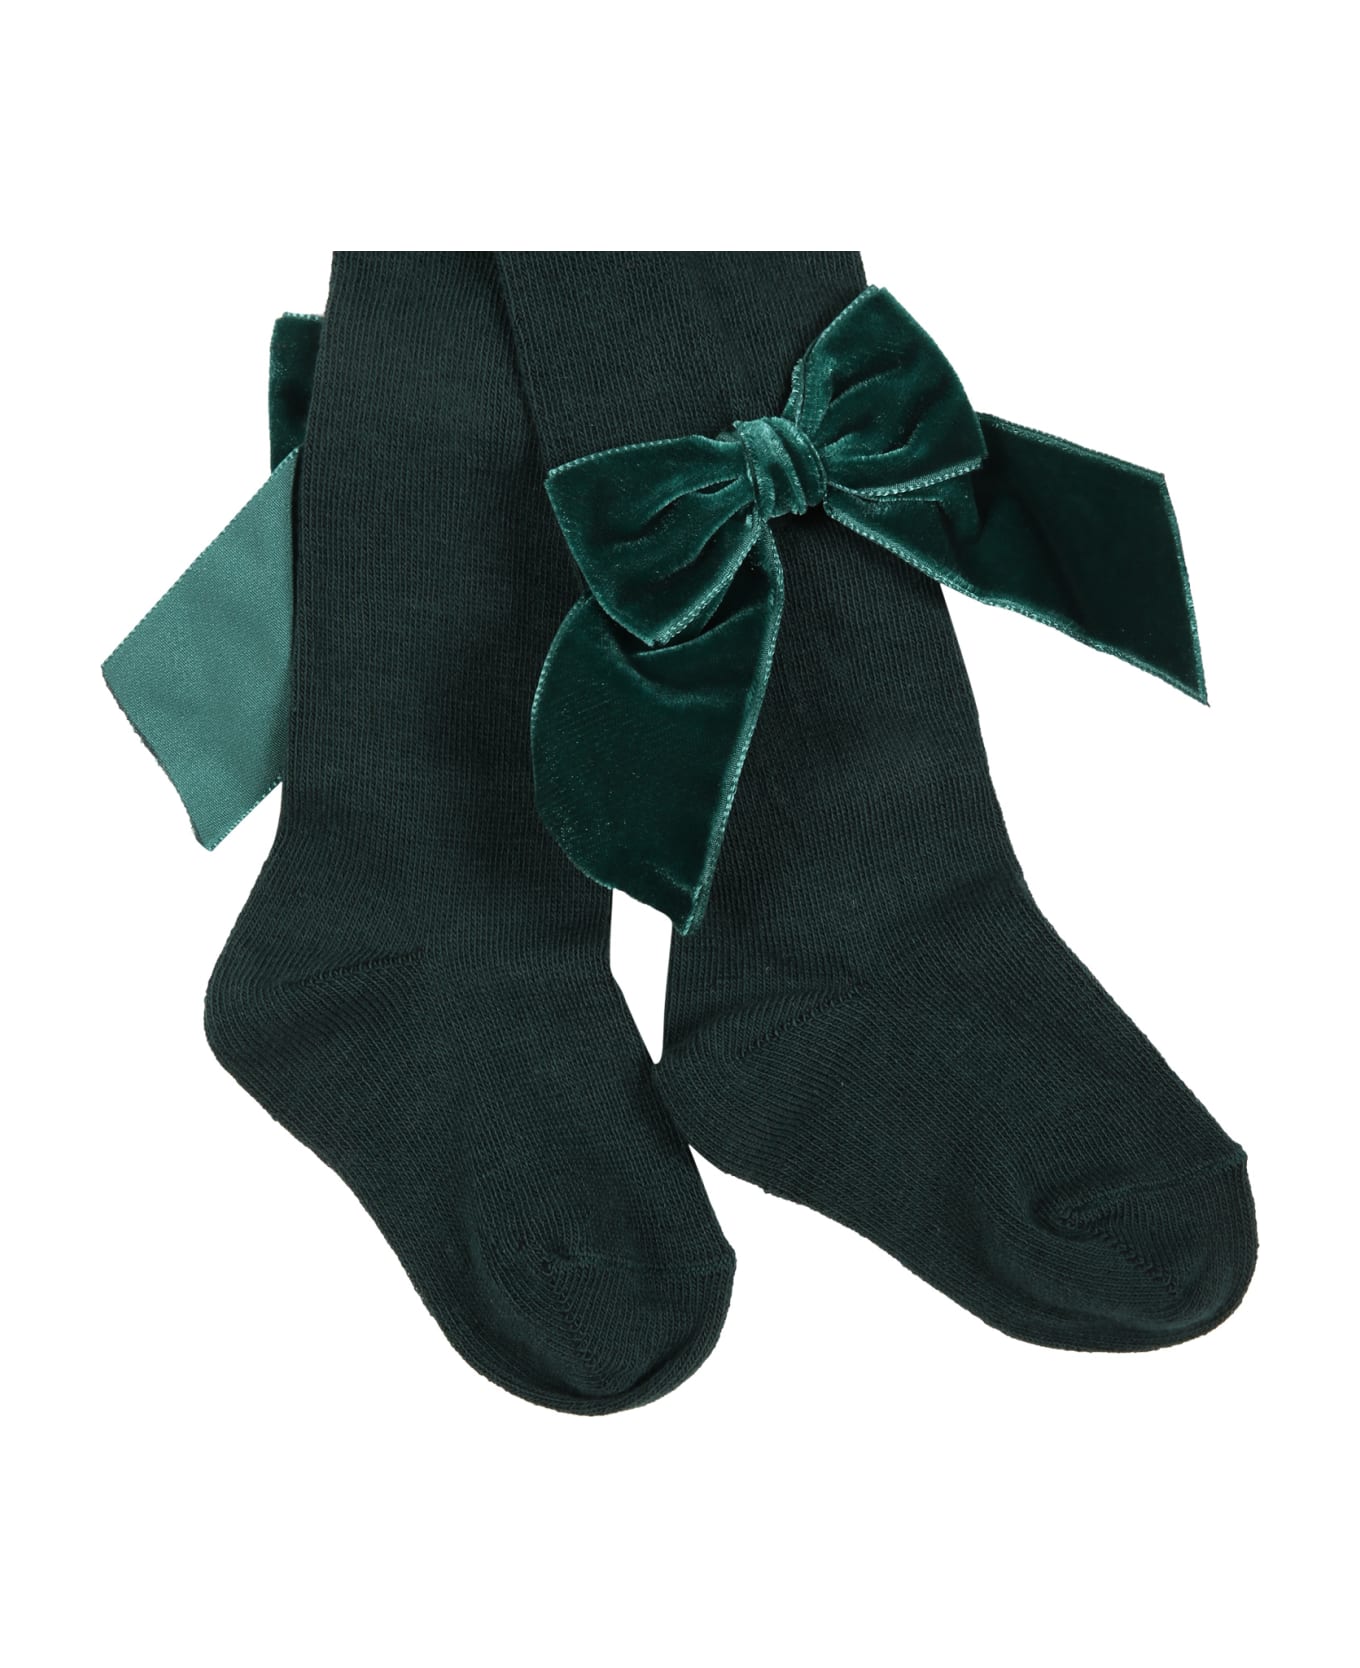 Story Loris Green Tights For Girl With Bow - Green アンダーウェア